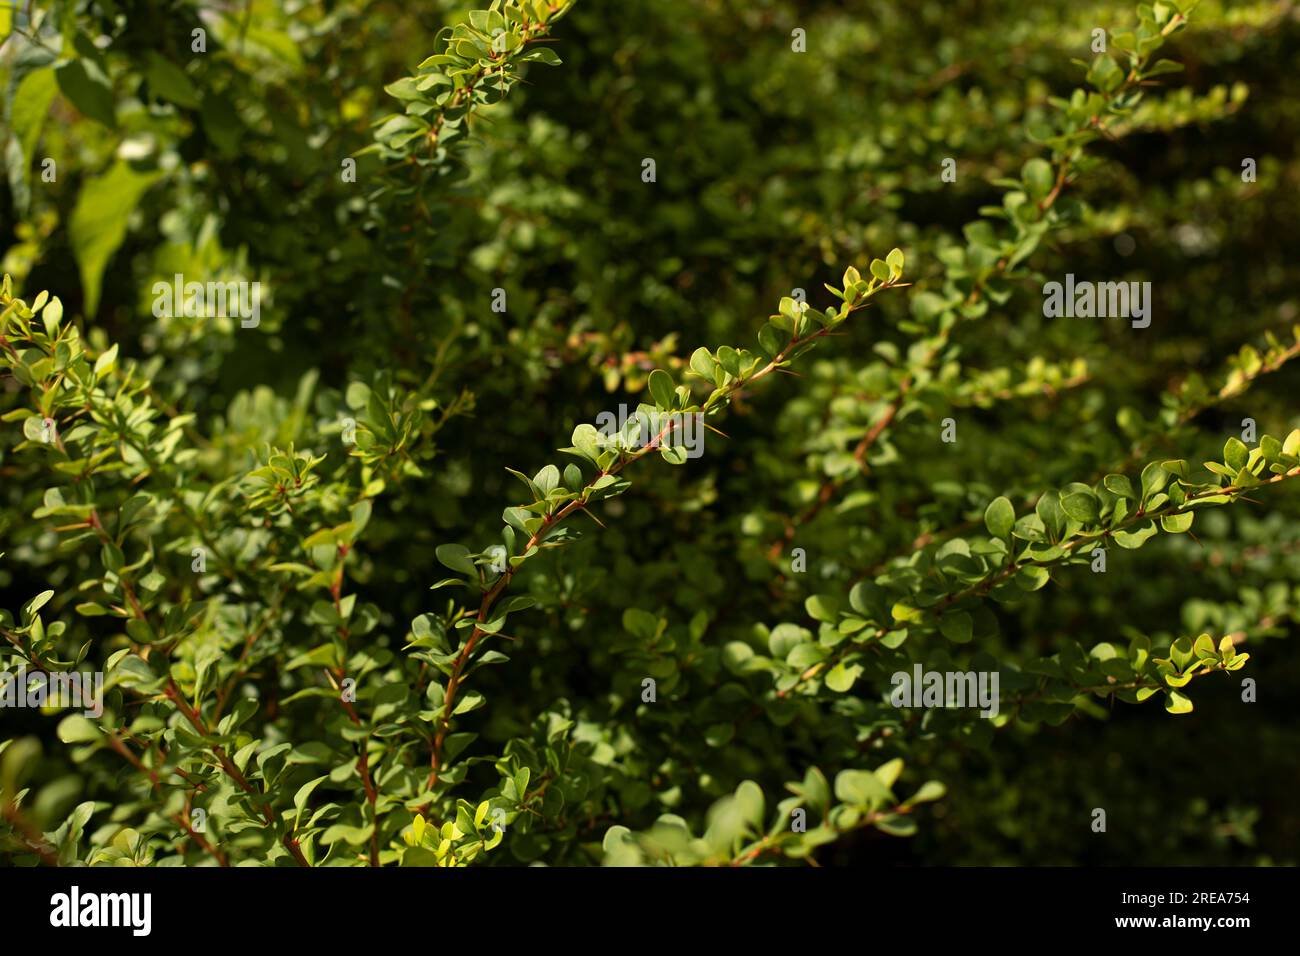 Green bush. Thin branches with small leaves. Details of nature in park. Garden plant. Stock Photo